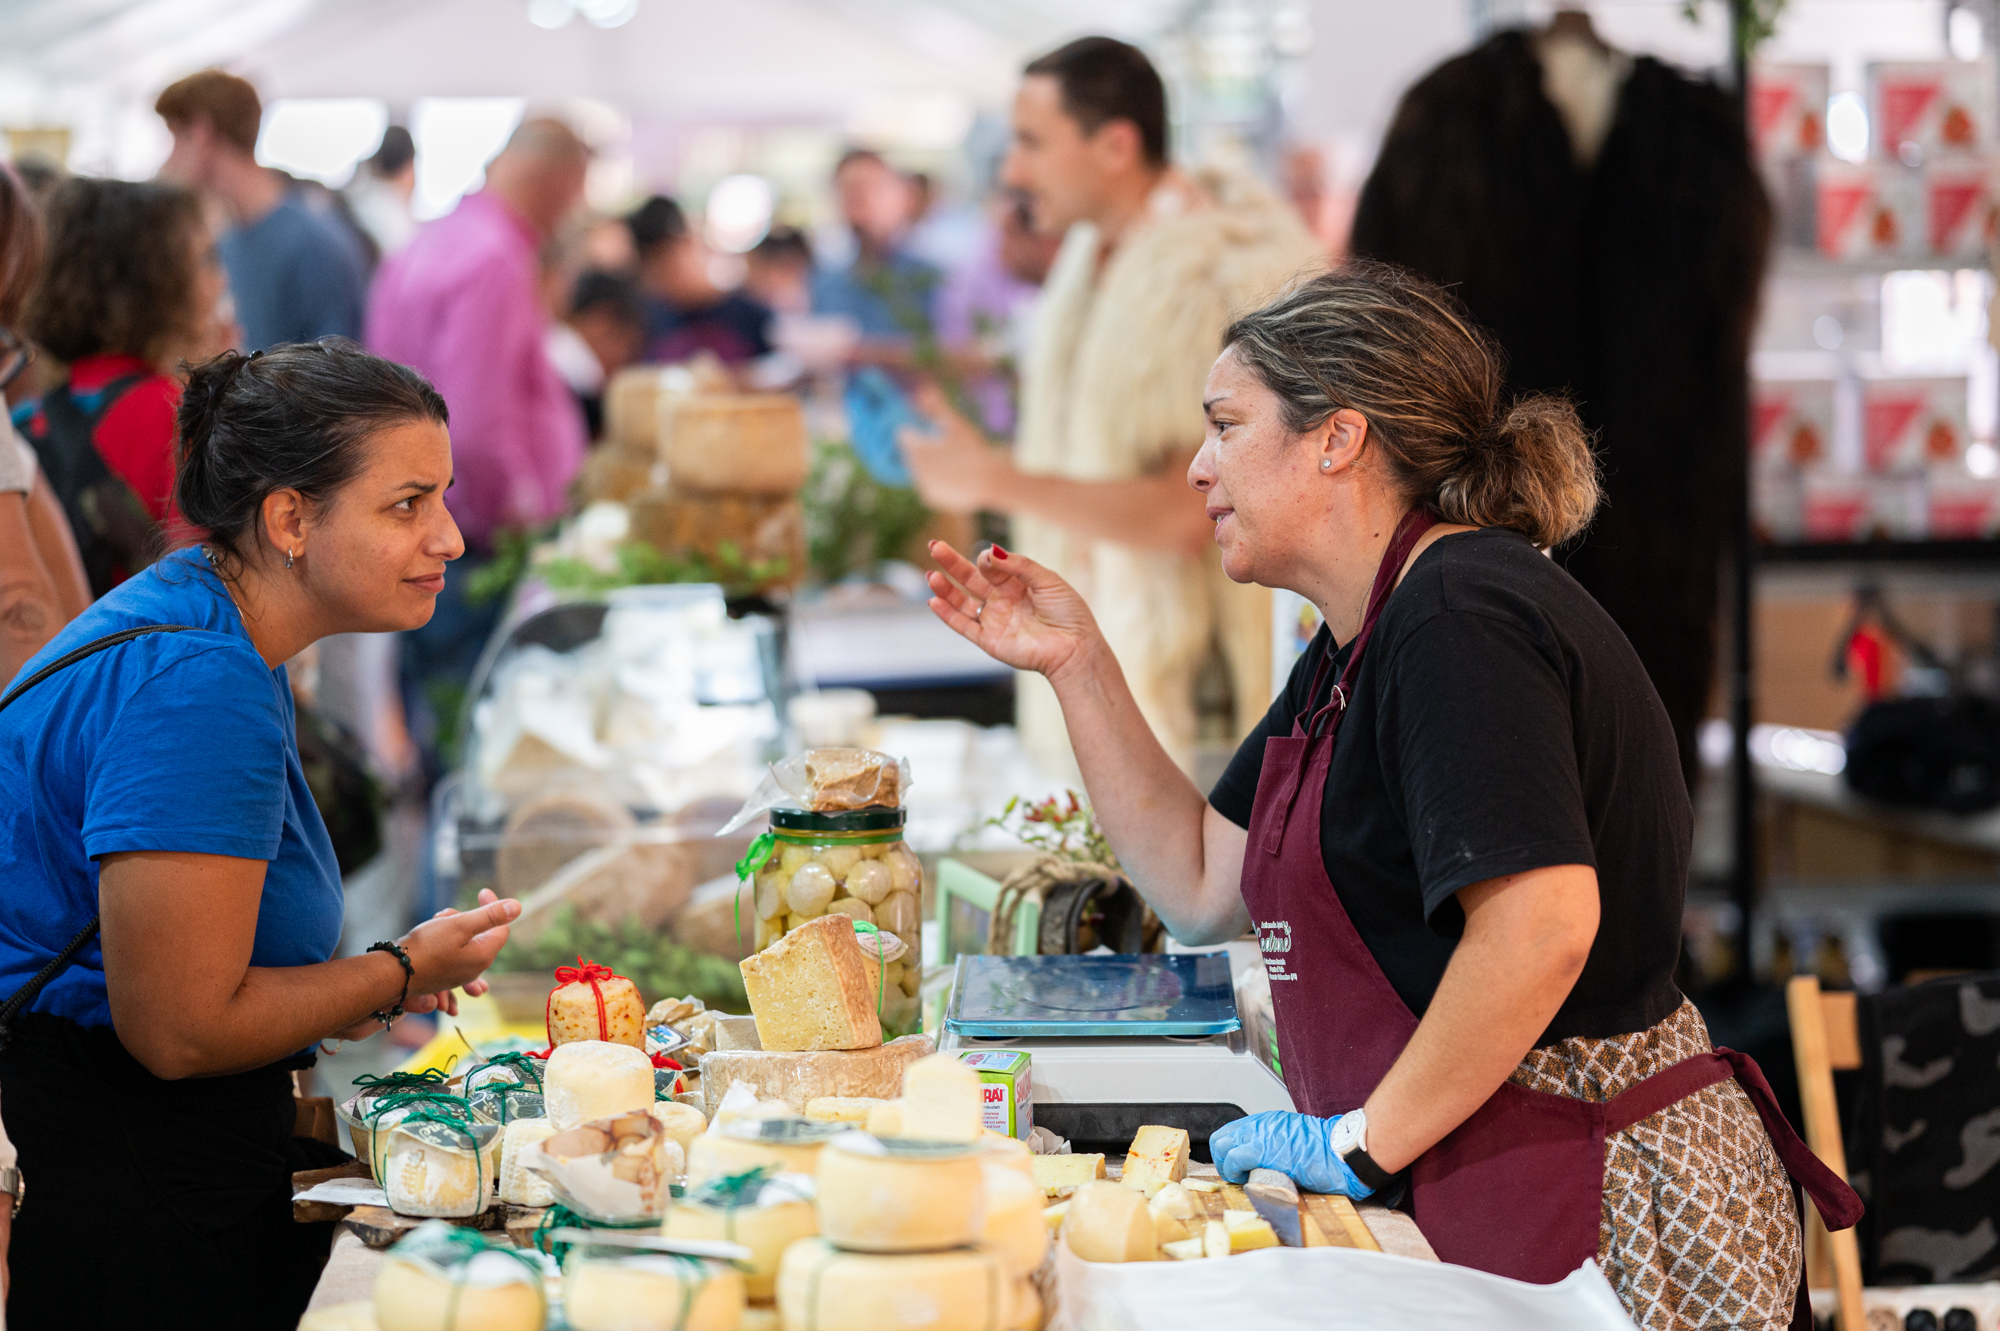 FACEnetwork at Slow Food Cheese Event